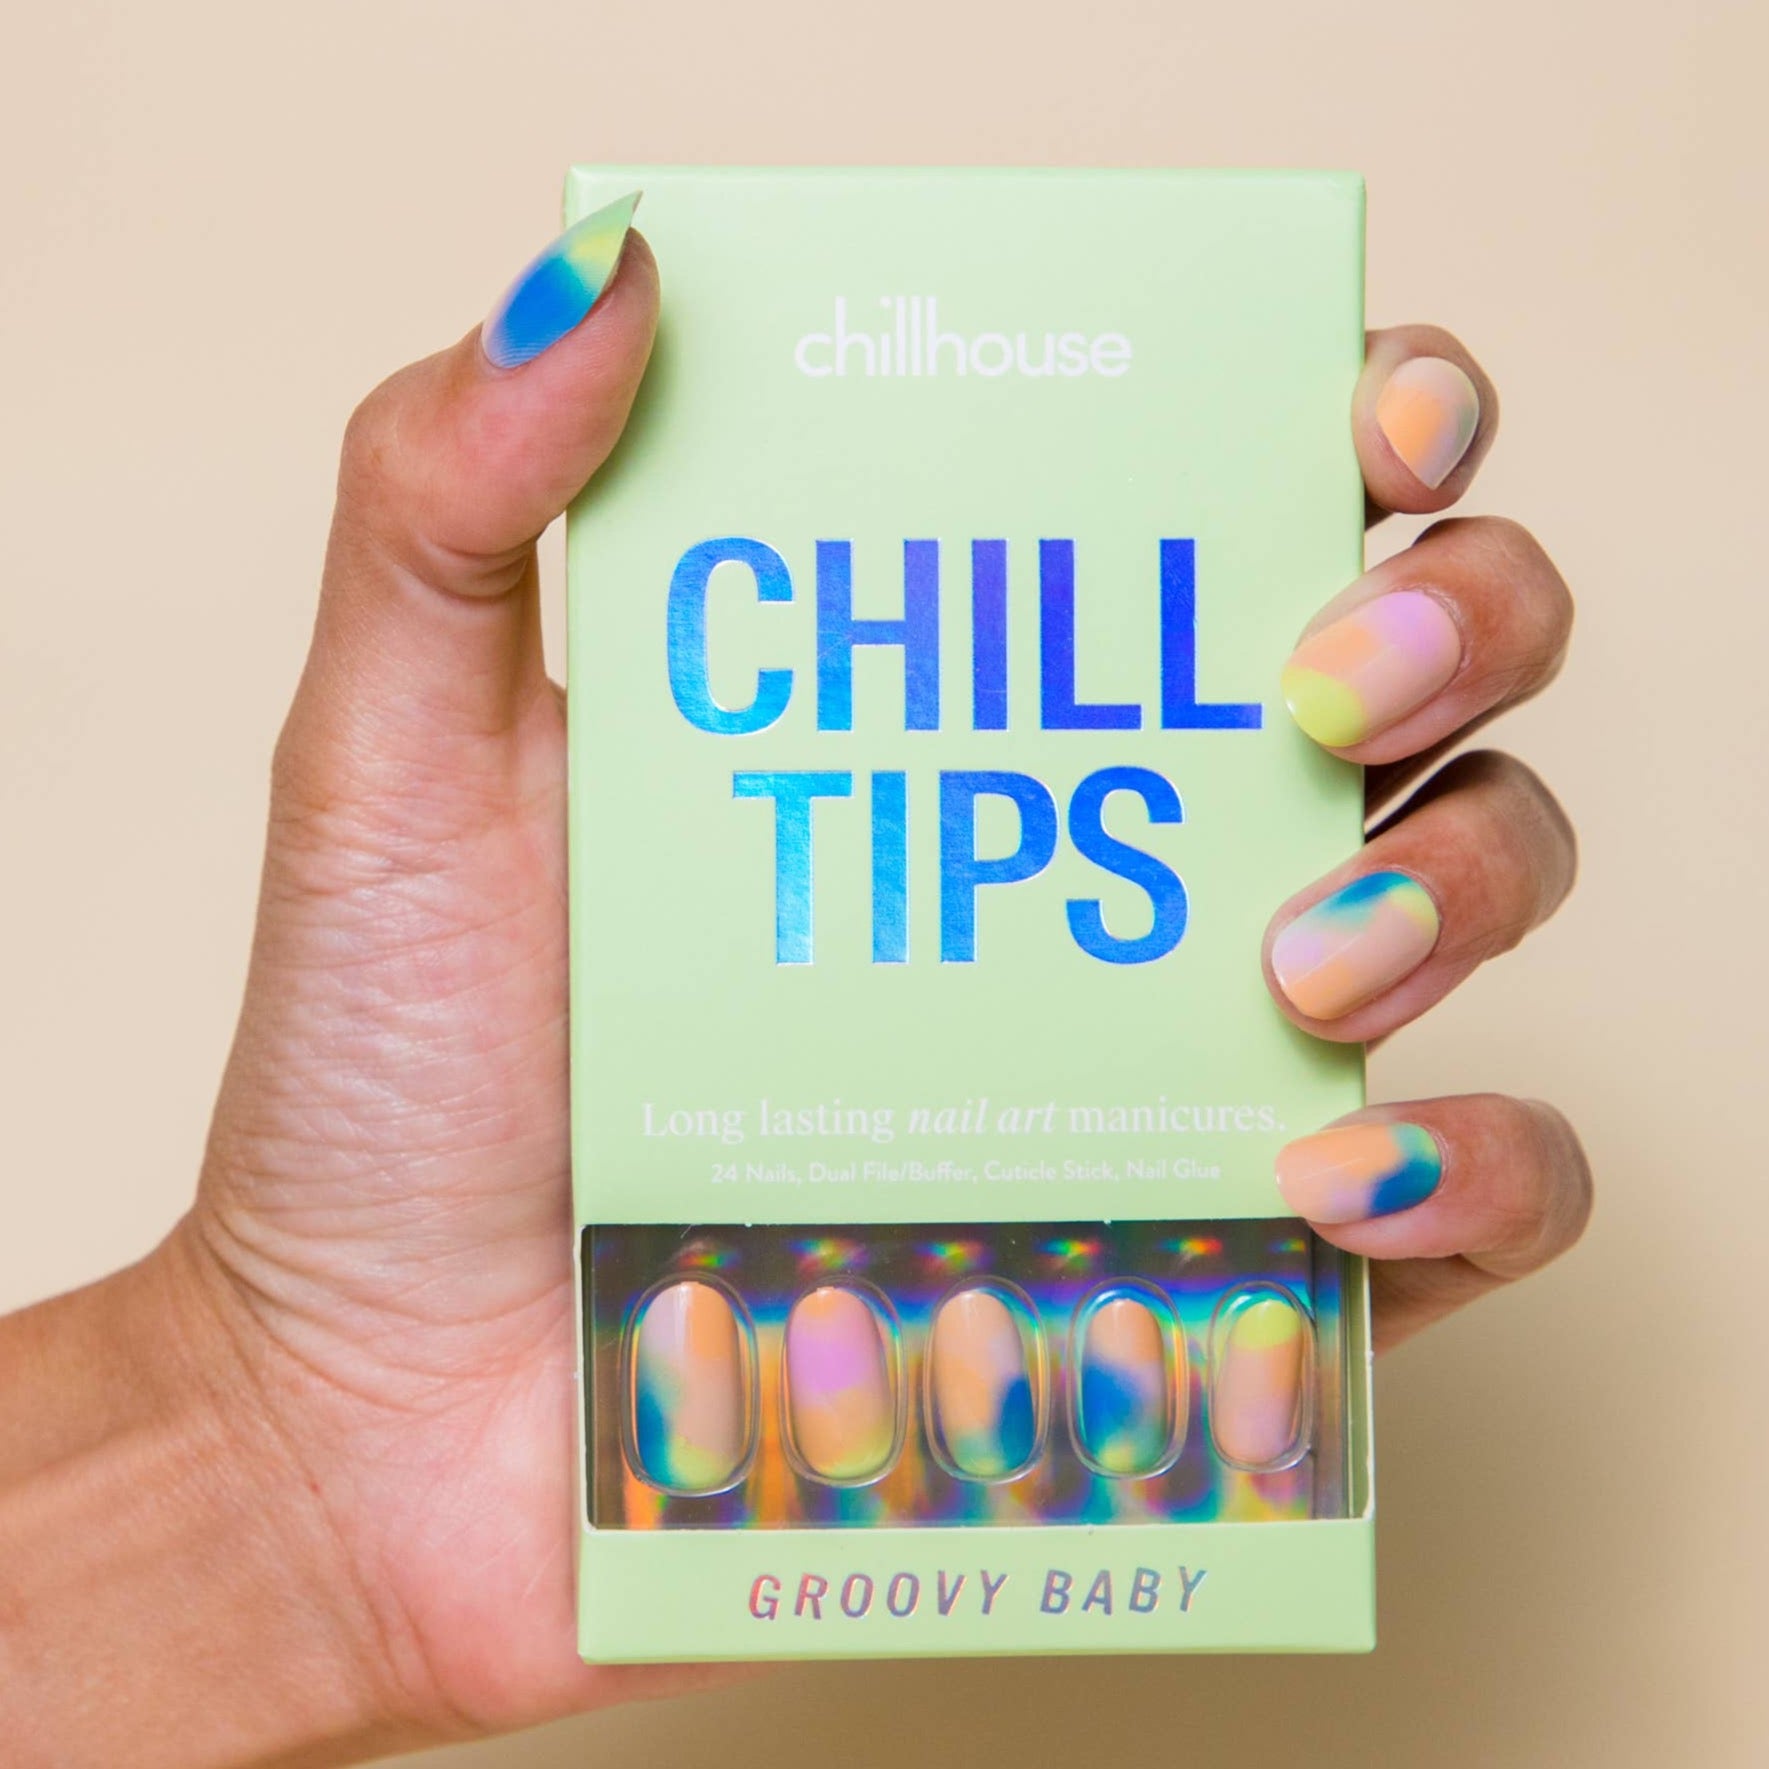 Chill Tips - Groovy Baby by Chillhouse